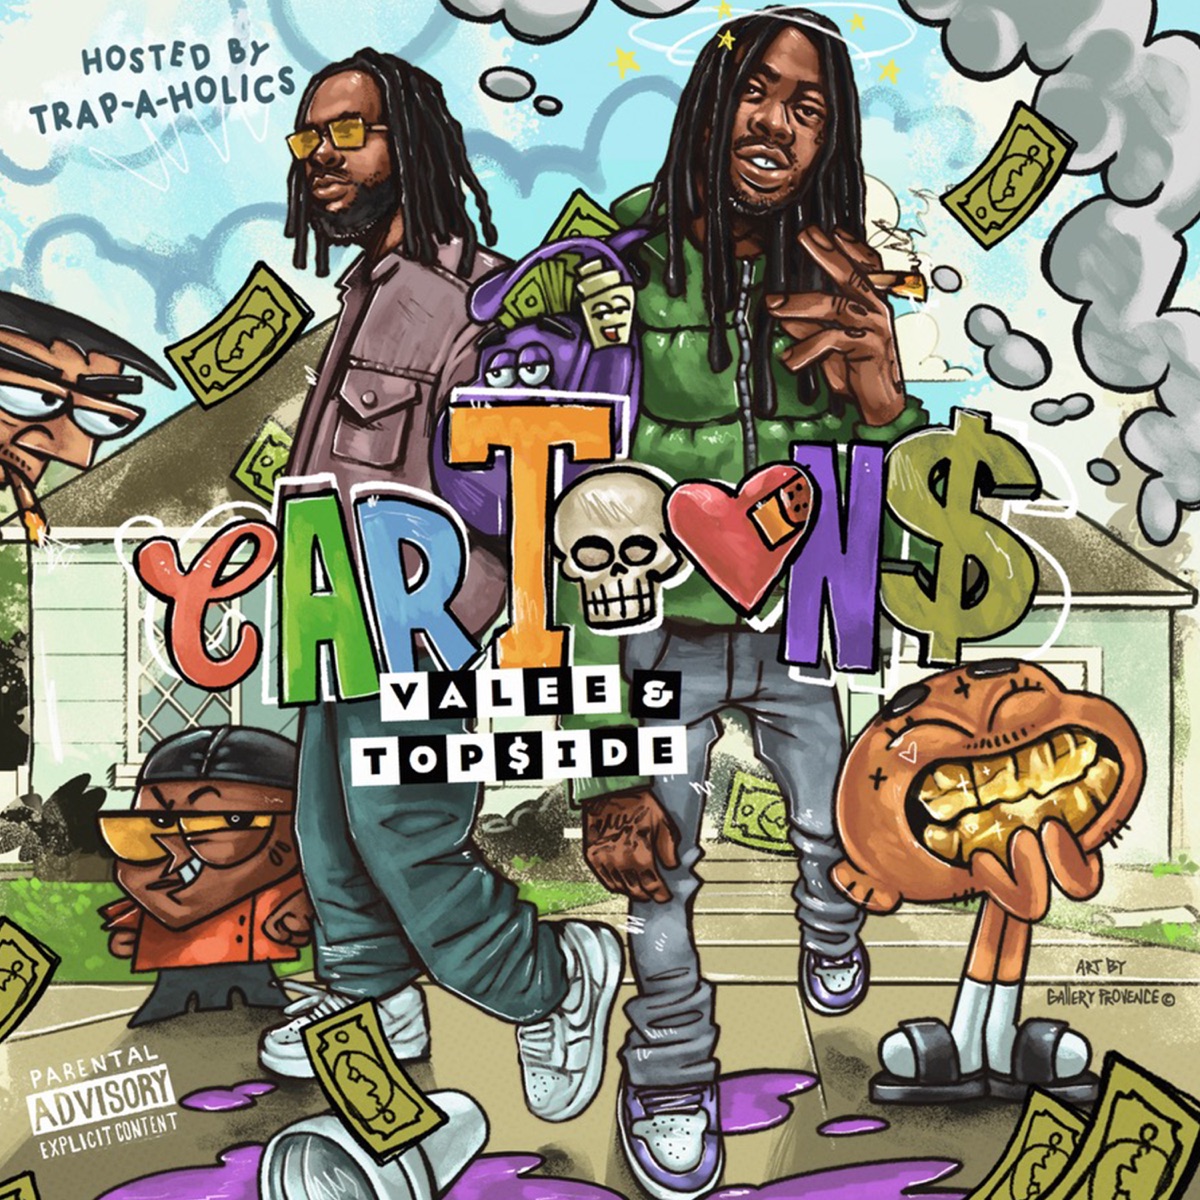 Valee, Top$ide & Trap-A-Holics – WhatdafuckdoUmean